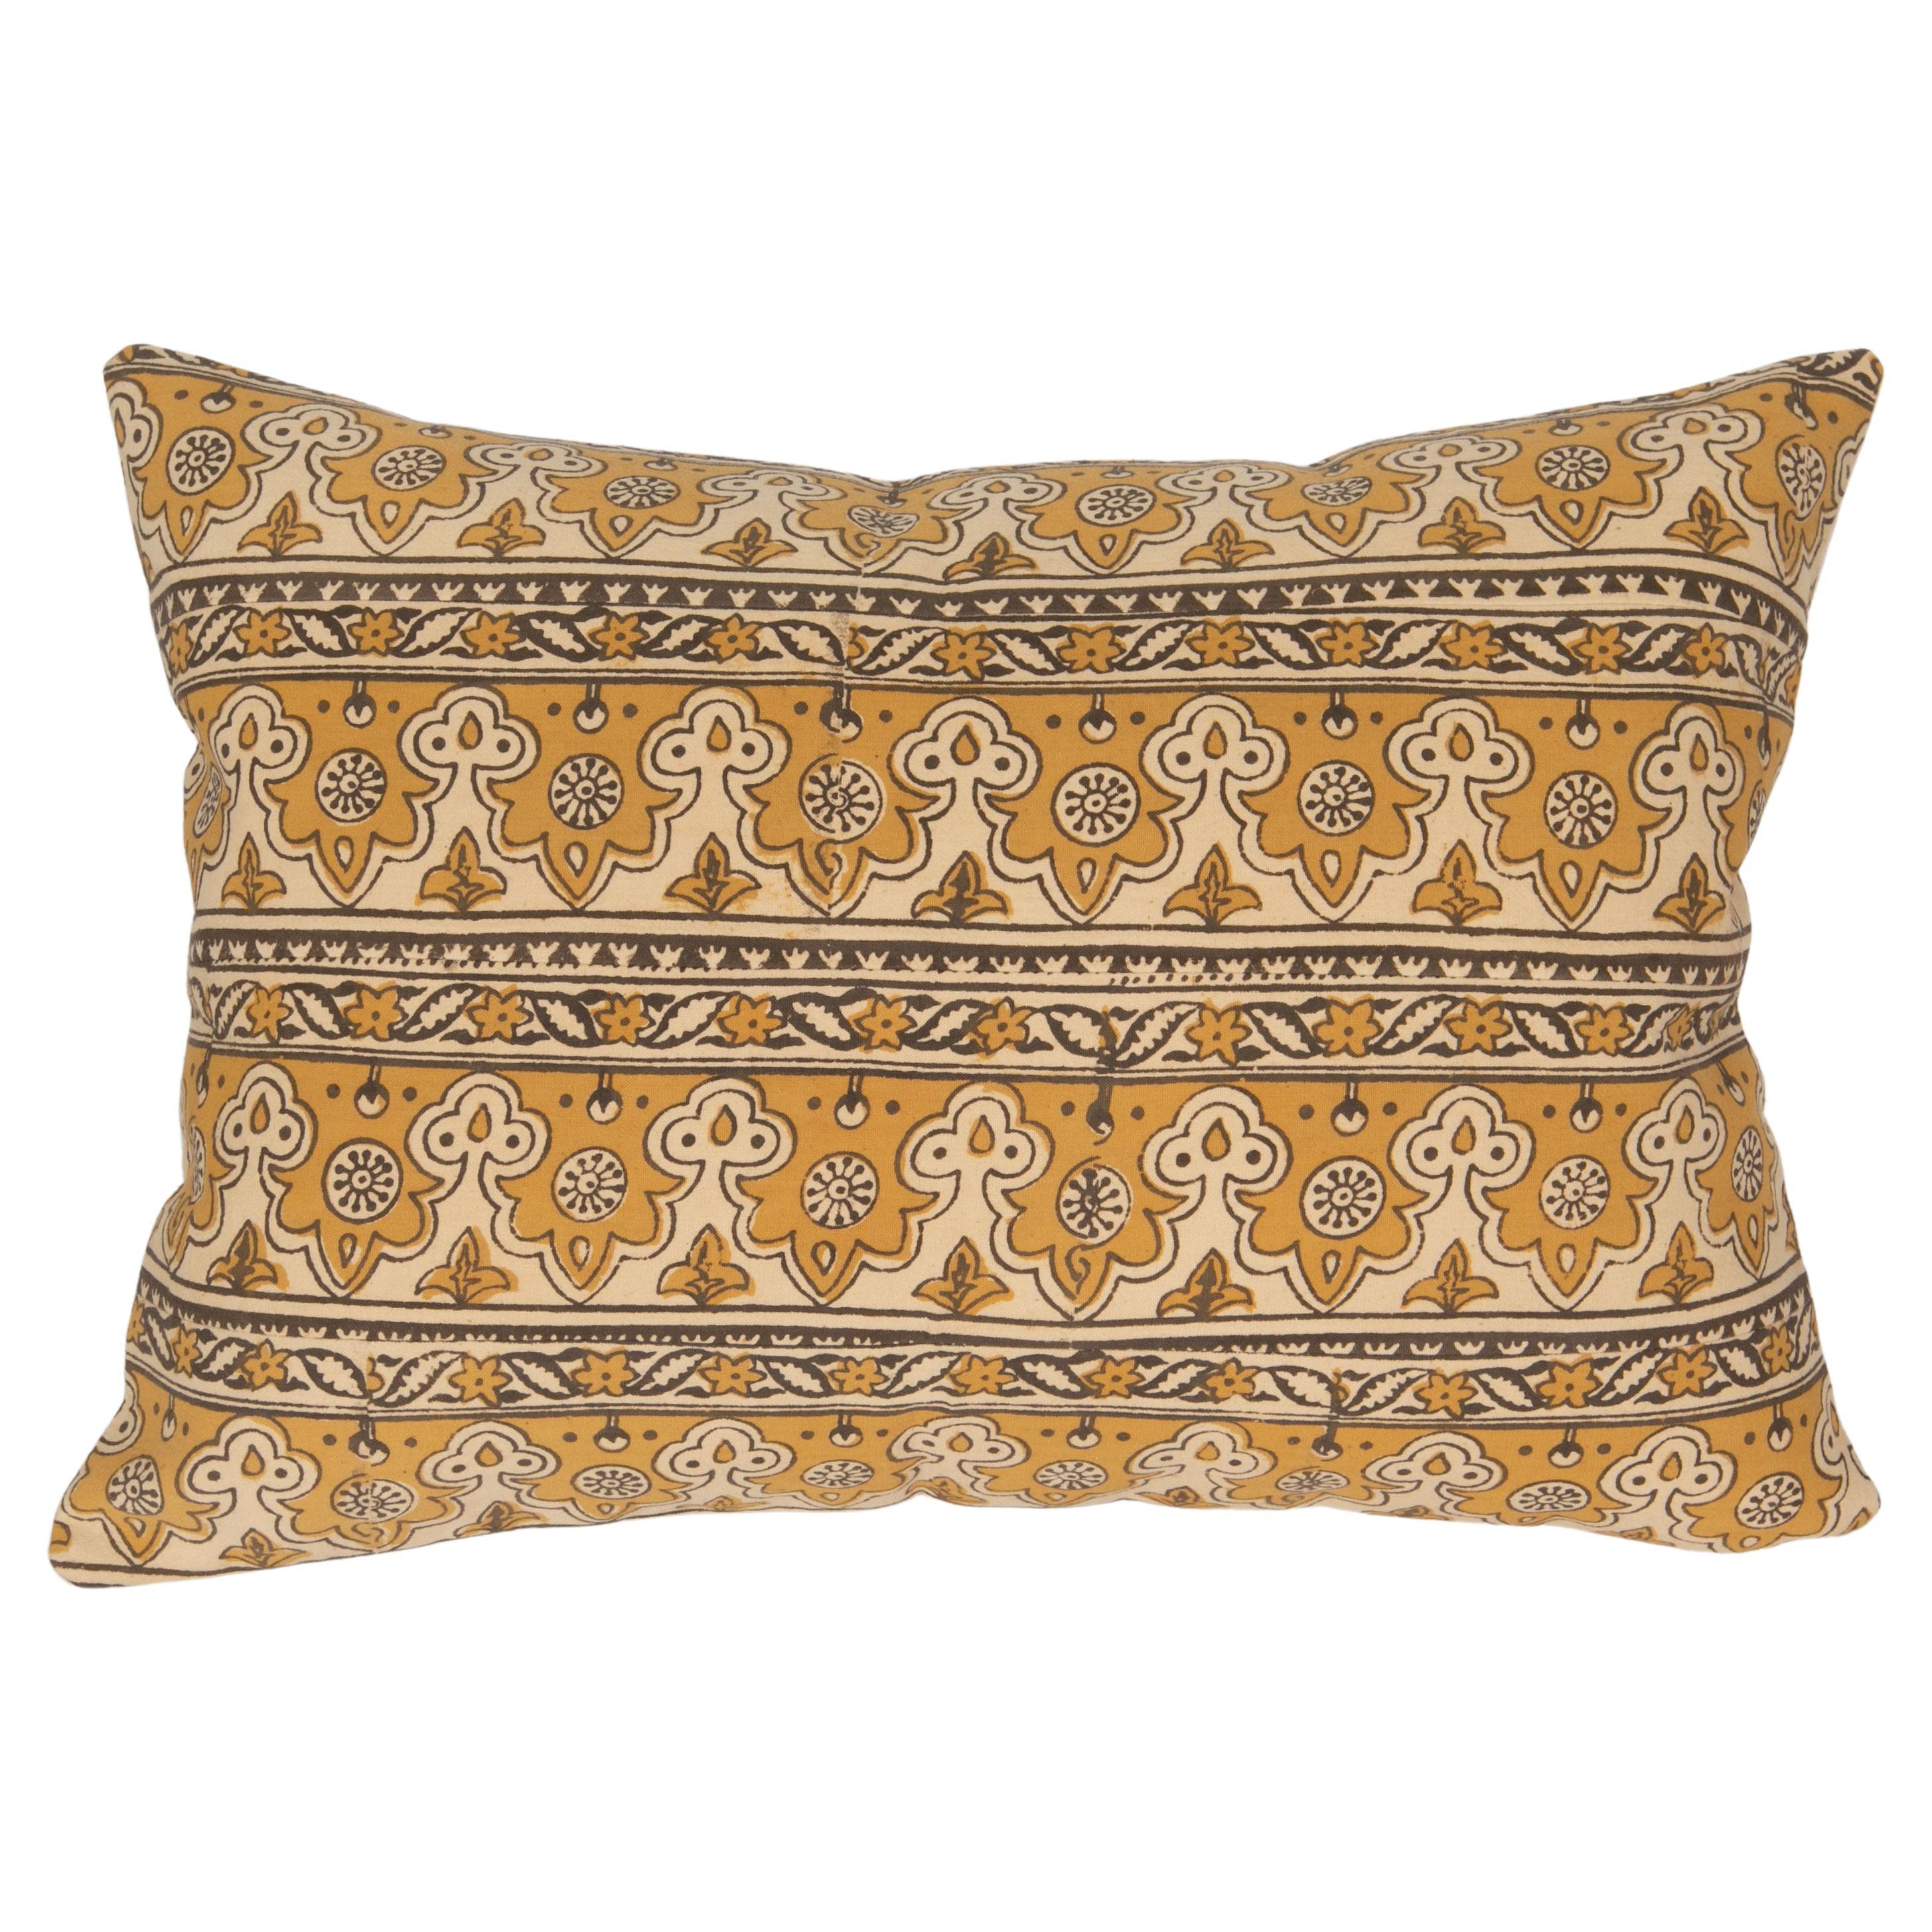 Pillow Case Made from an Uzbek Block Print, Early 20th C For Sale